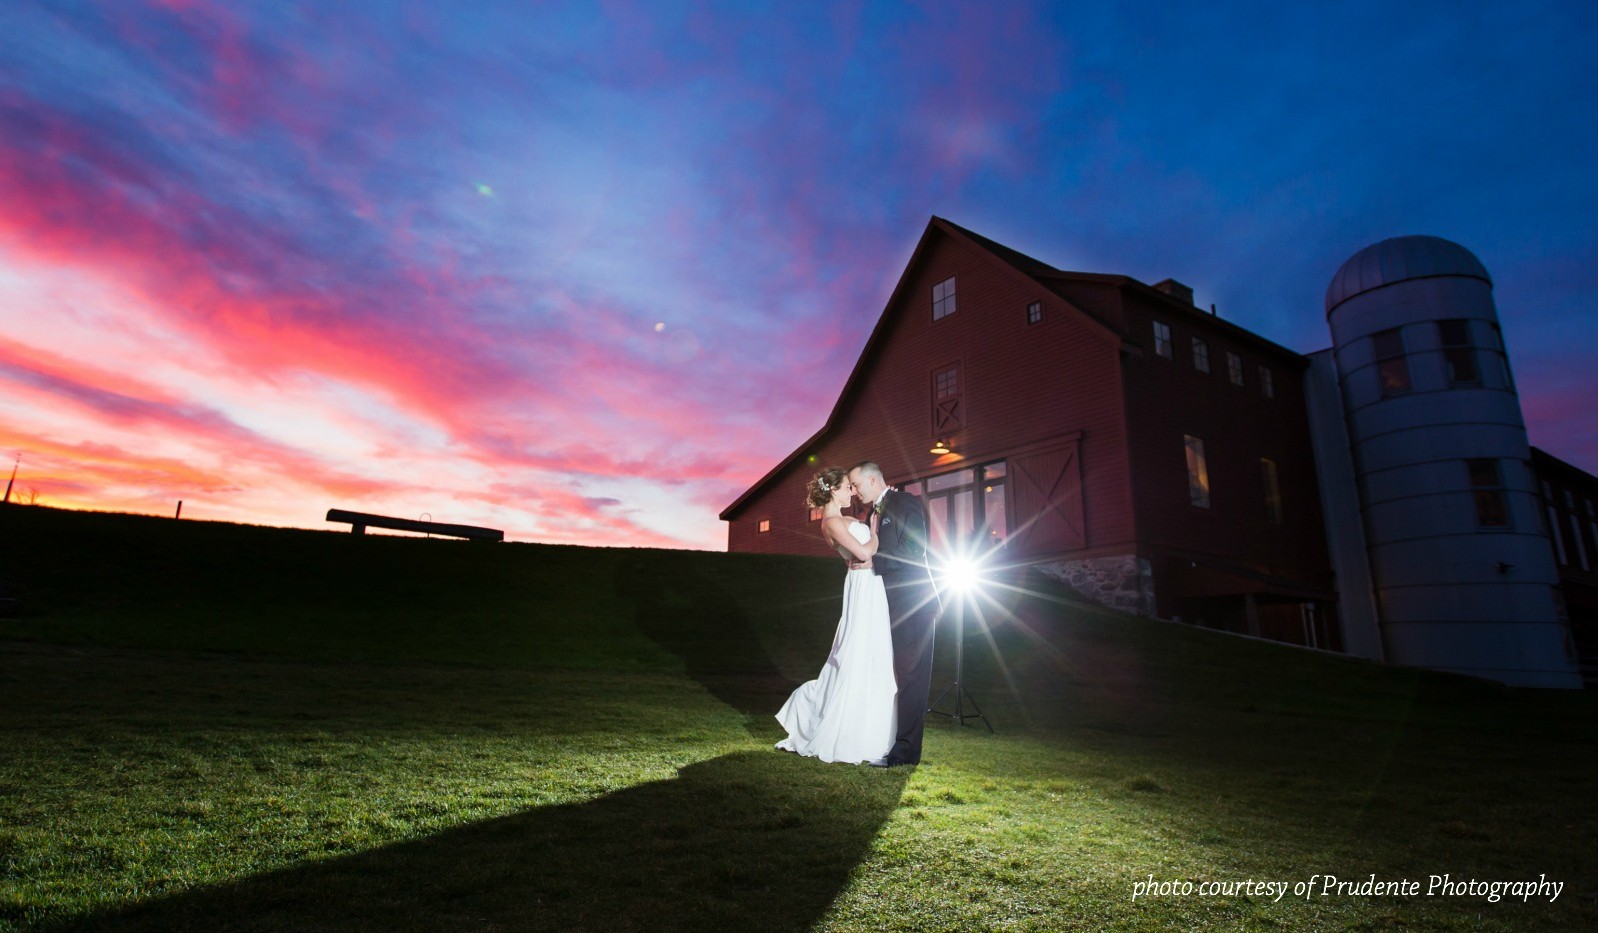 Married couple with sunset and barn in background